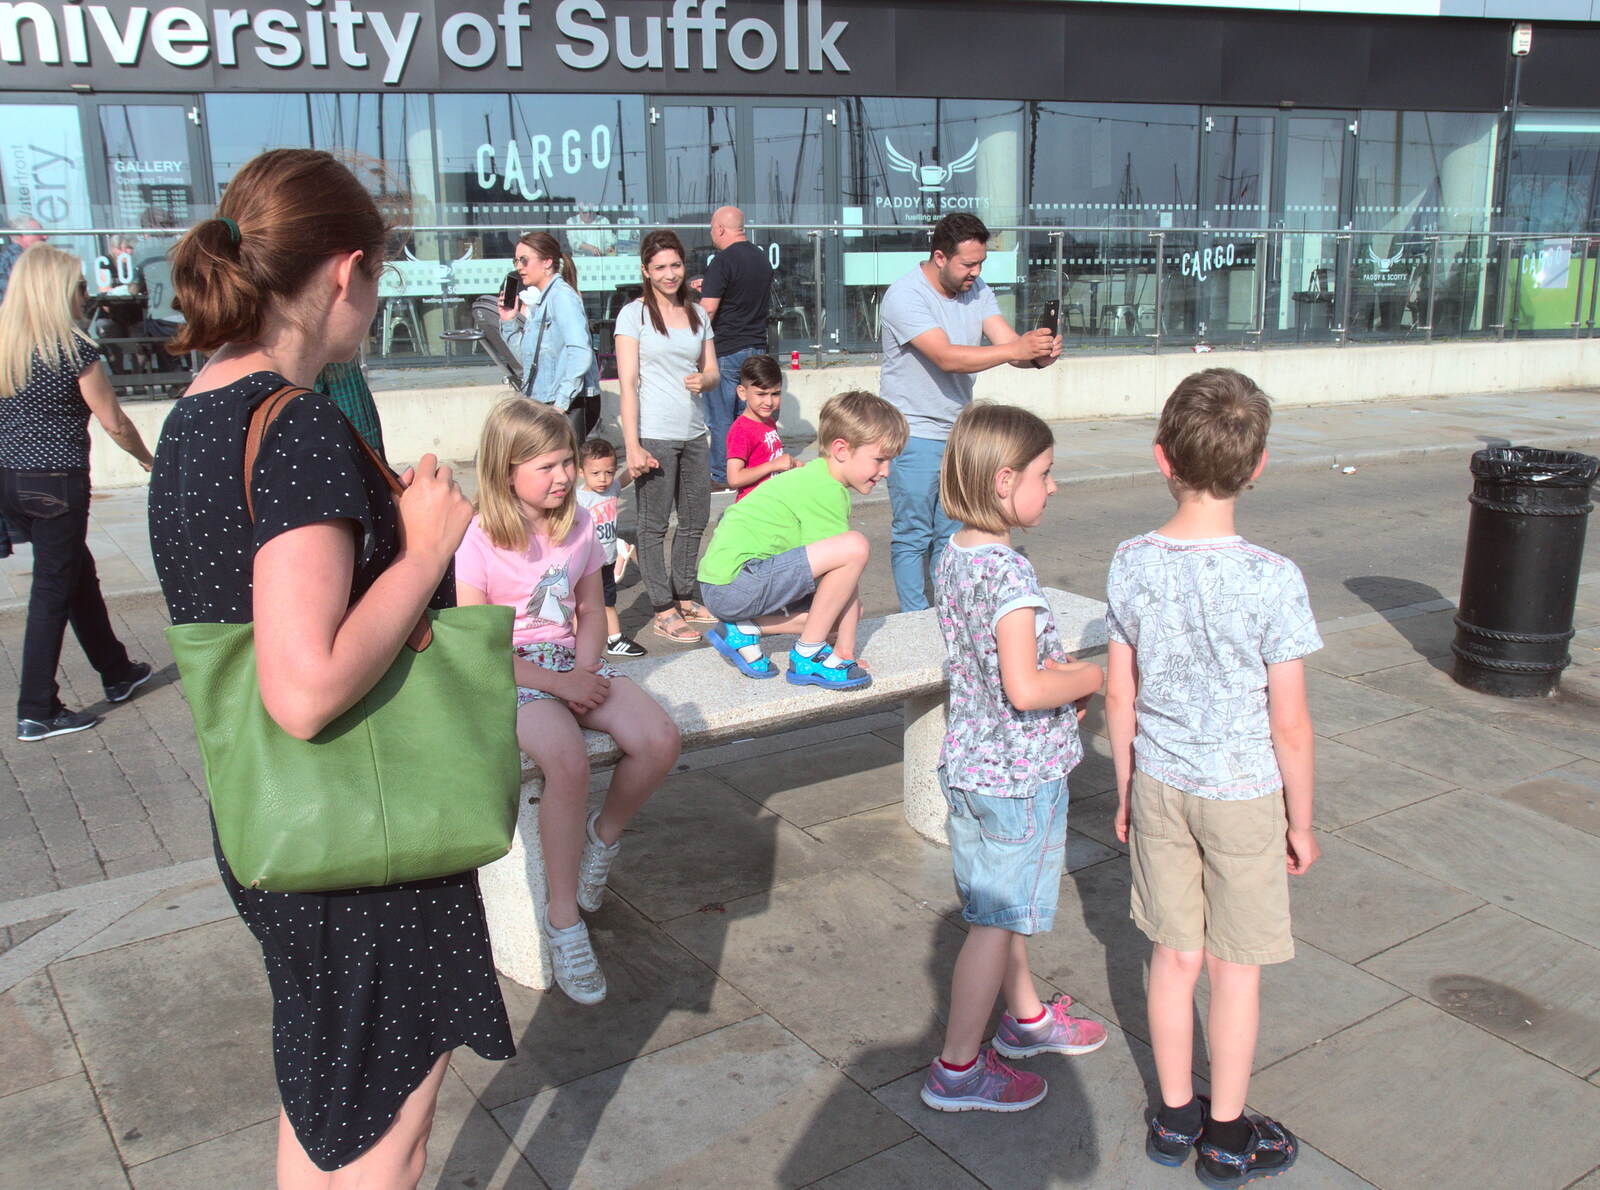 Outside the University of Suffolk from An Unexpected Birthday, Ipswich, Suffolk - 26th May 2018